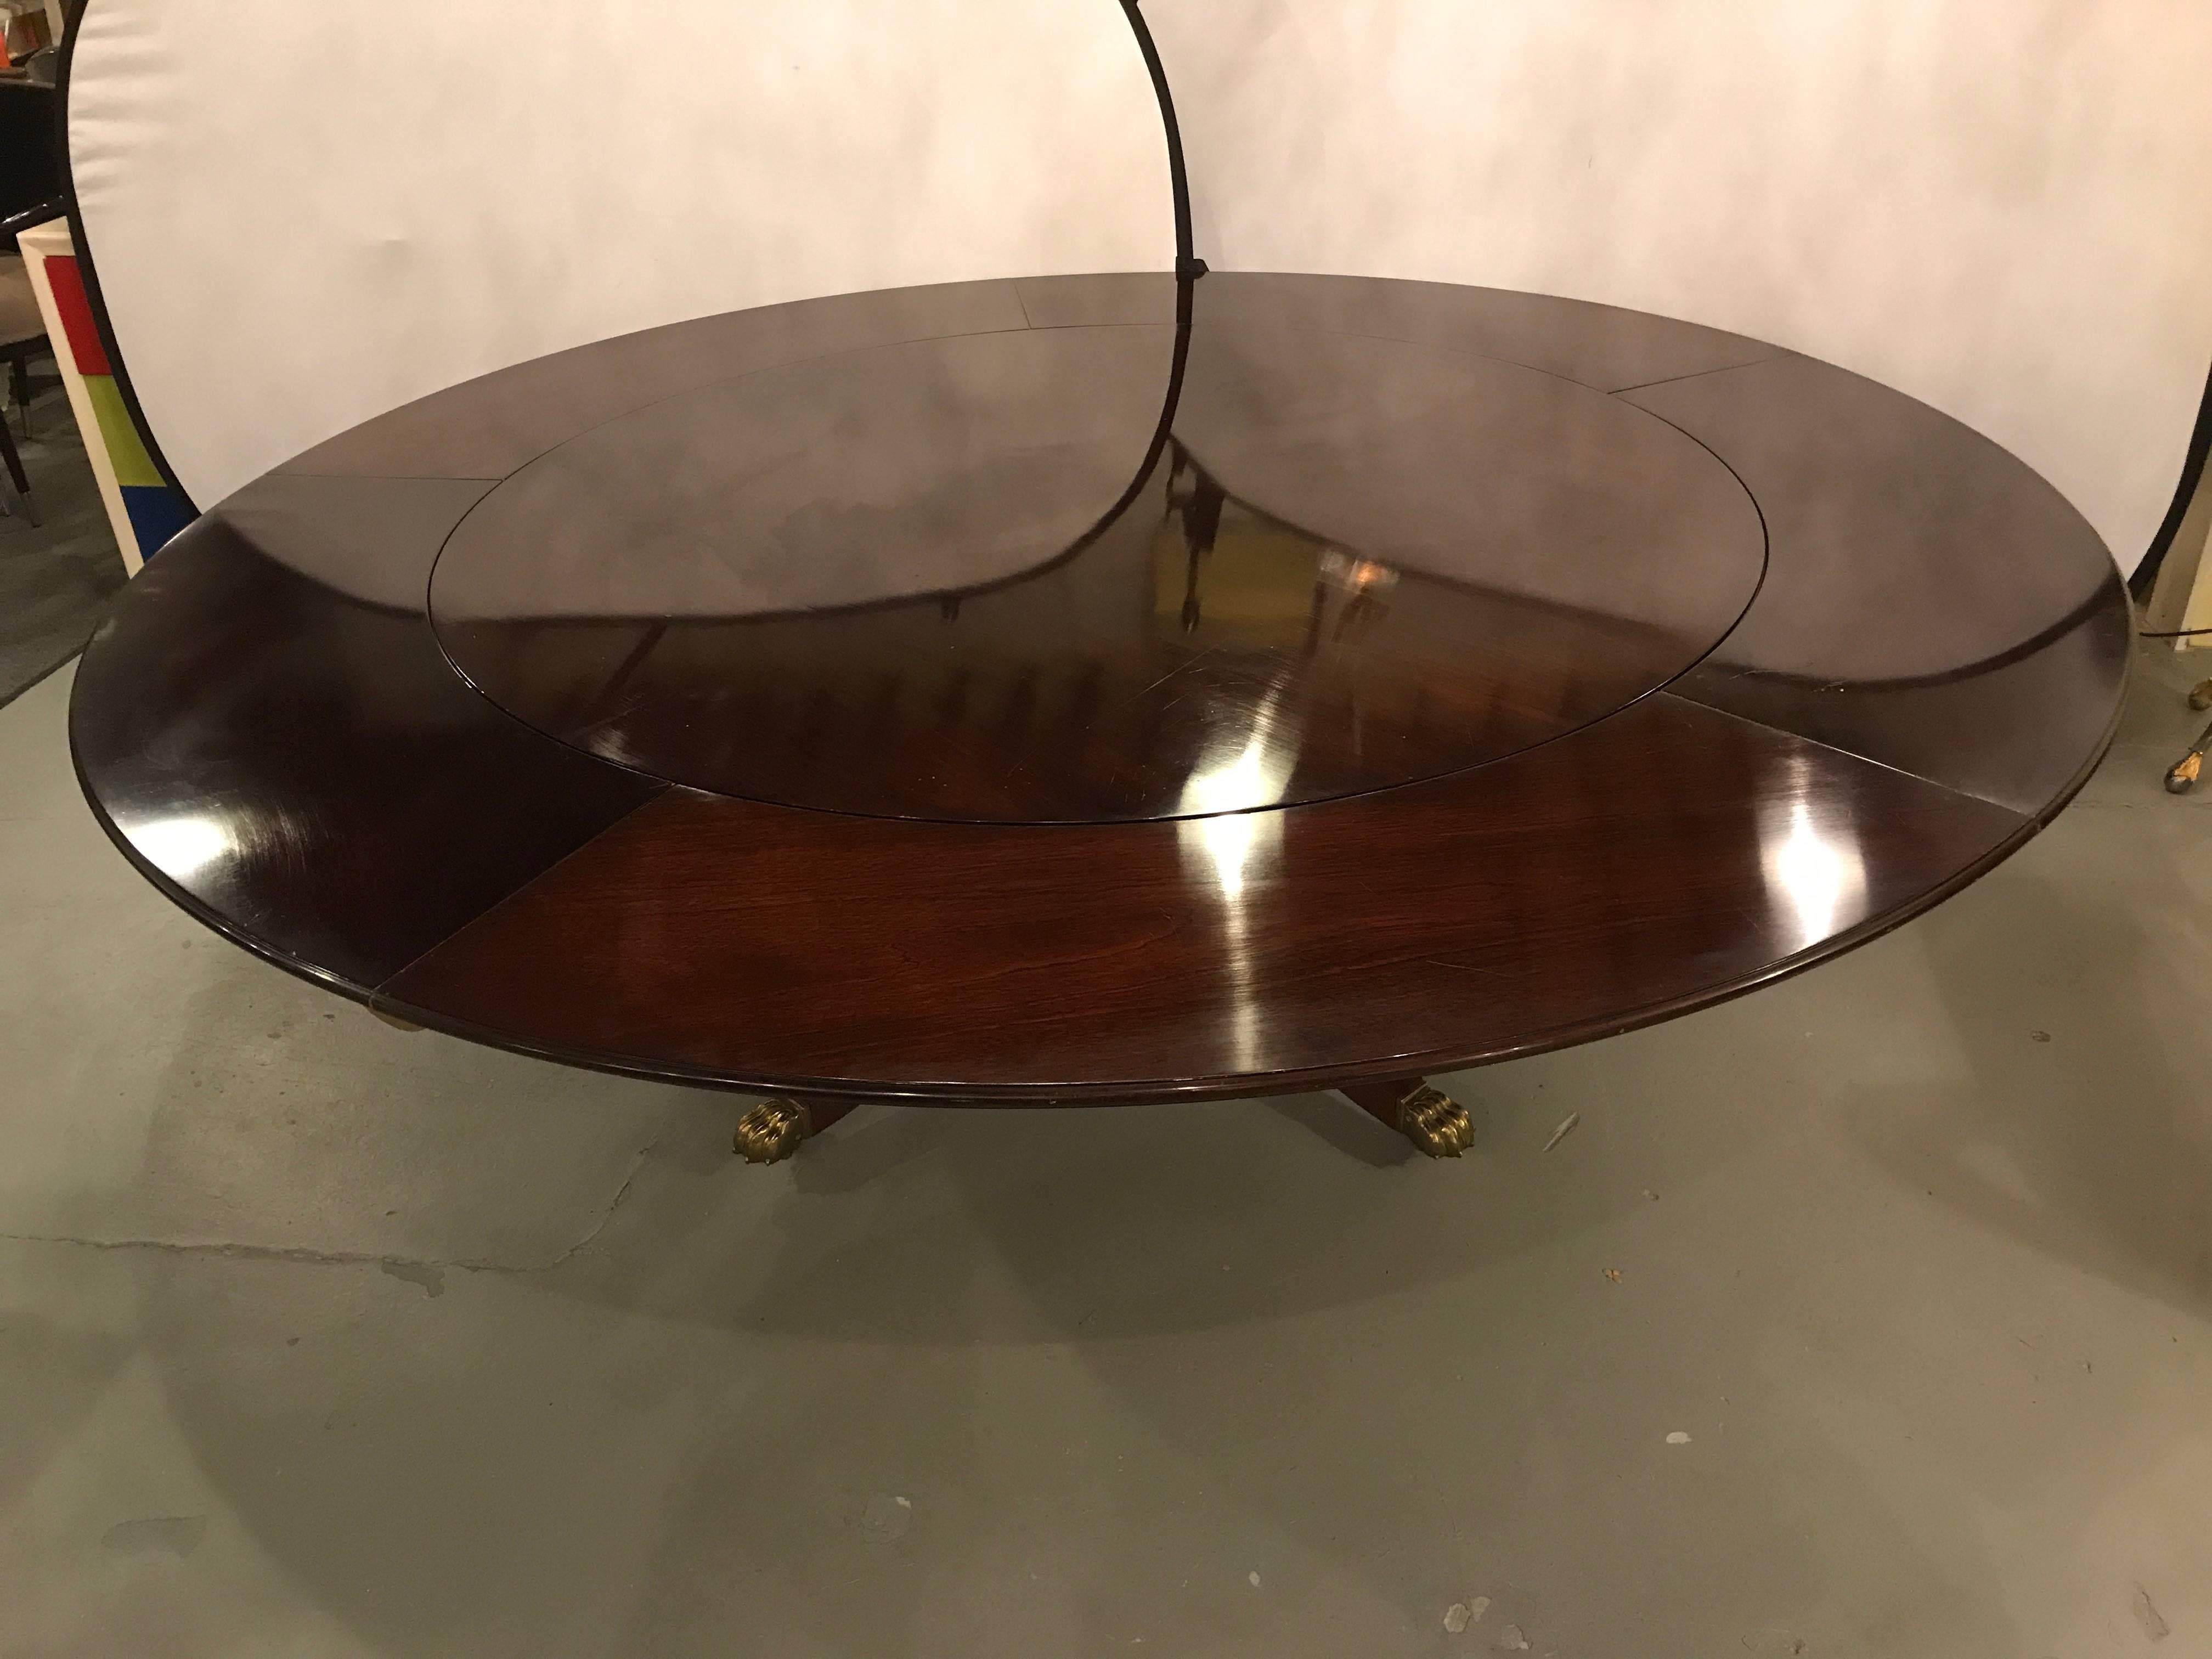 A circular dining table by William Tillman. This fine solid mahogany dining room table is made of flame mahogany having five 14 inch interlocking leaves and sits atop a quad based pedestal with a lower shelving area on sprayed legs terminating in